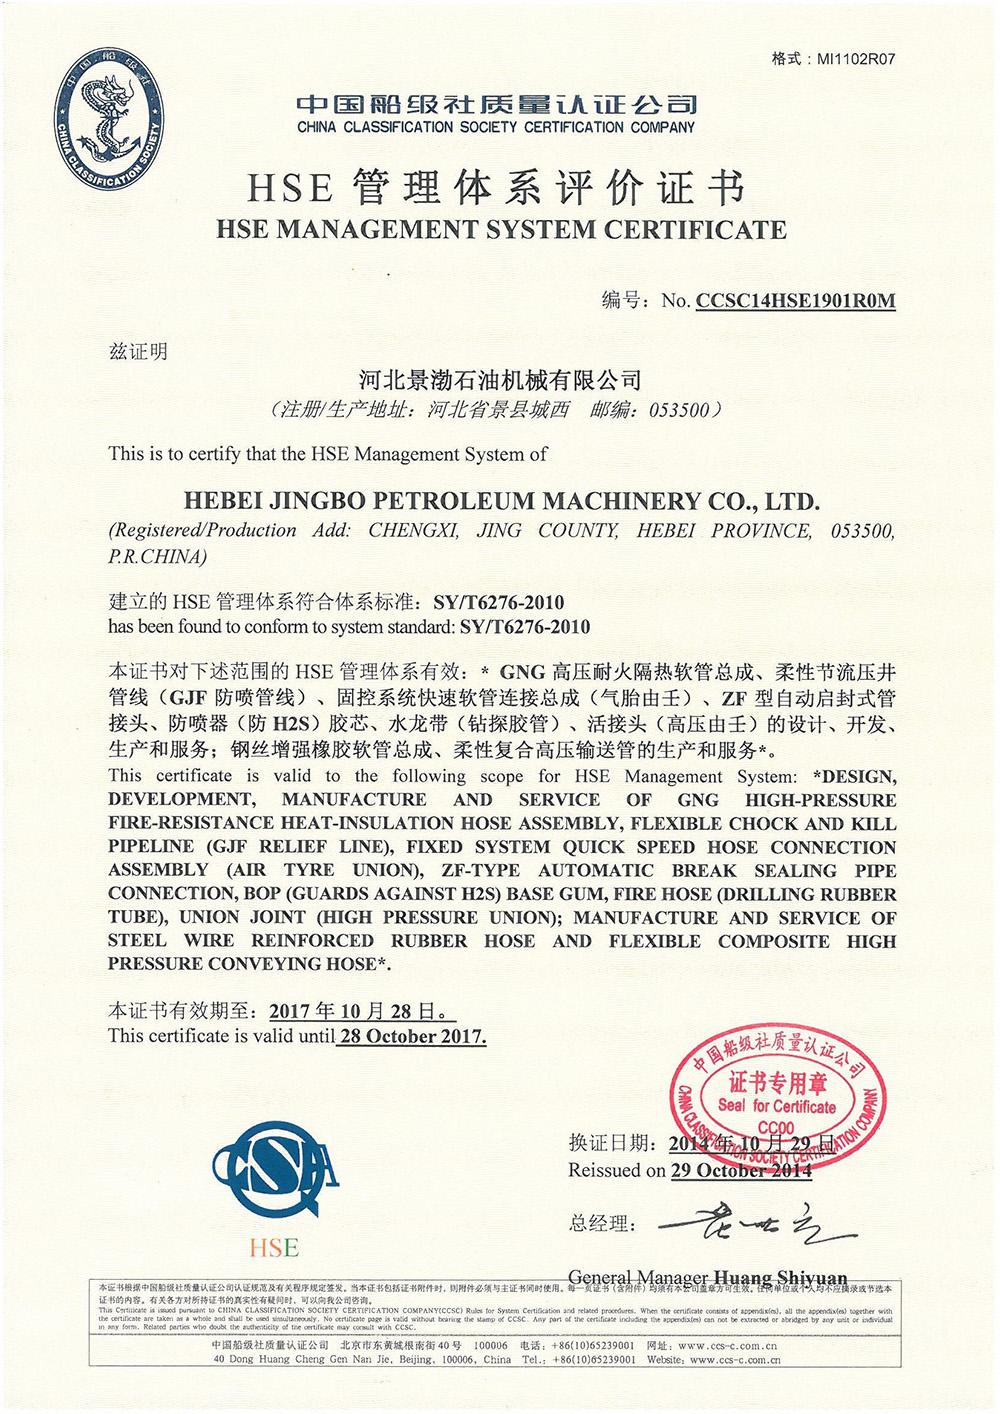 HSE Management System Certificate